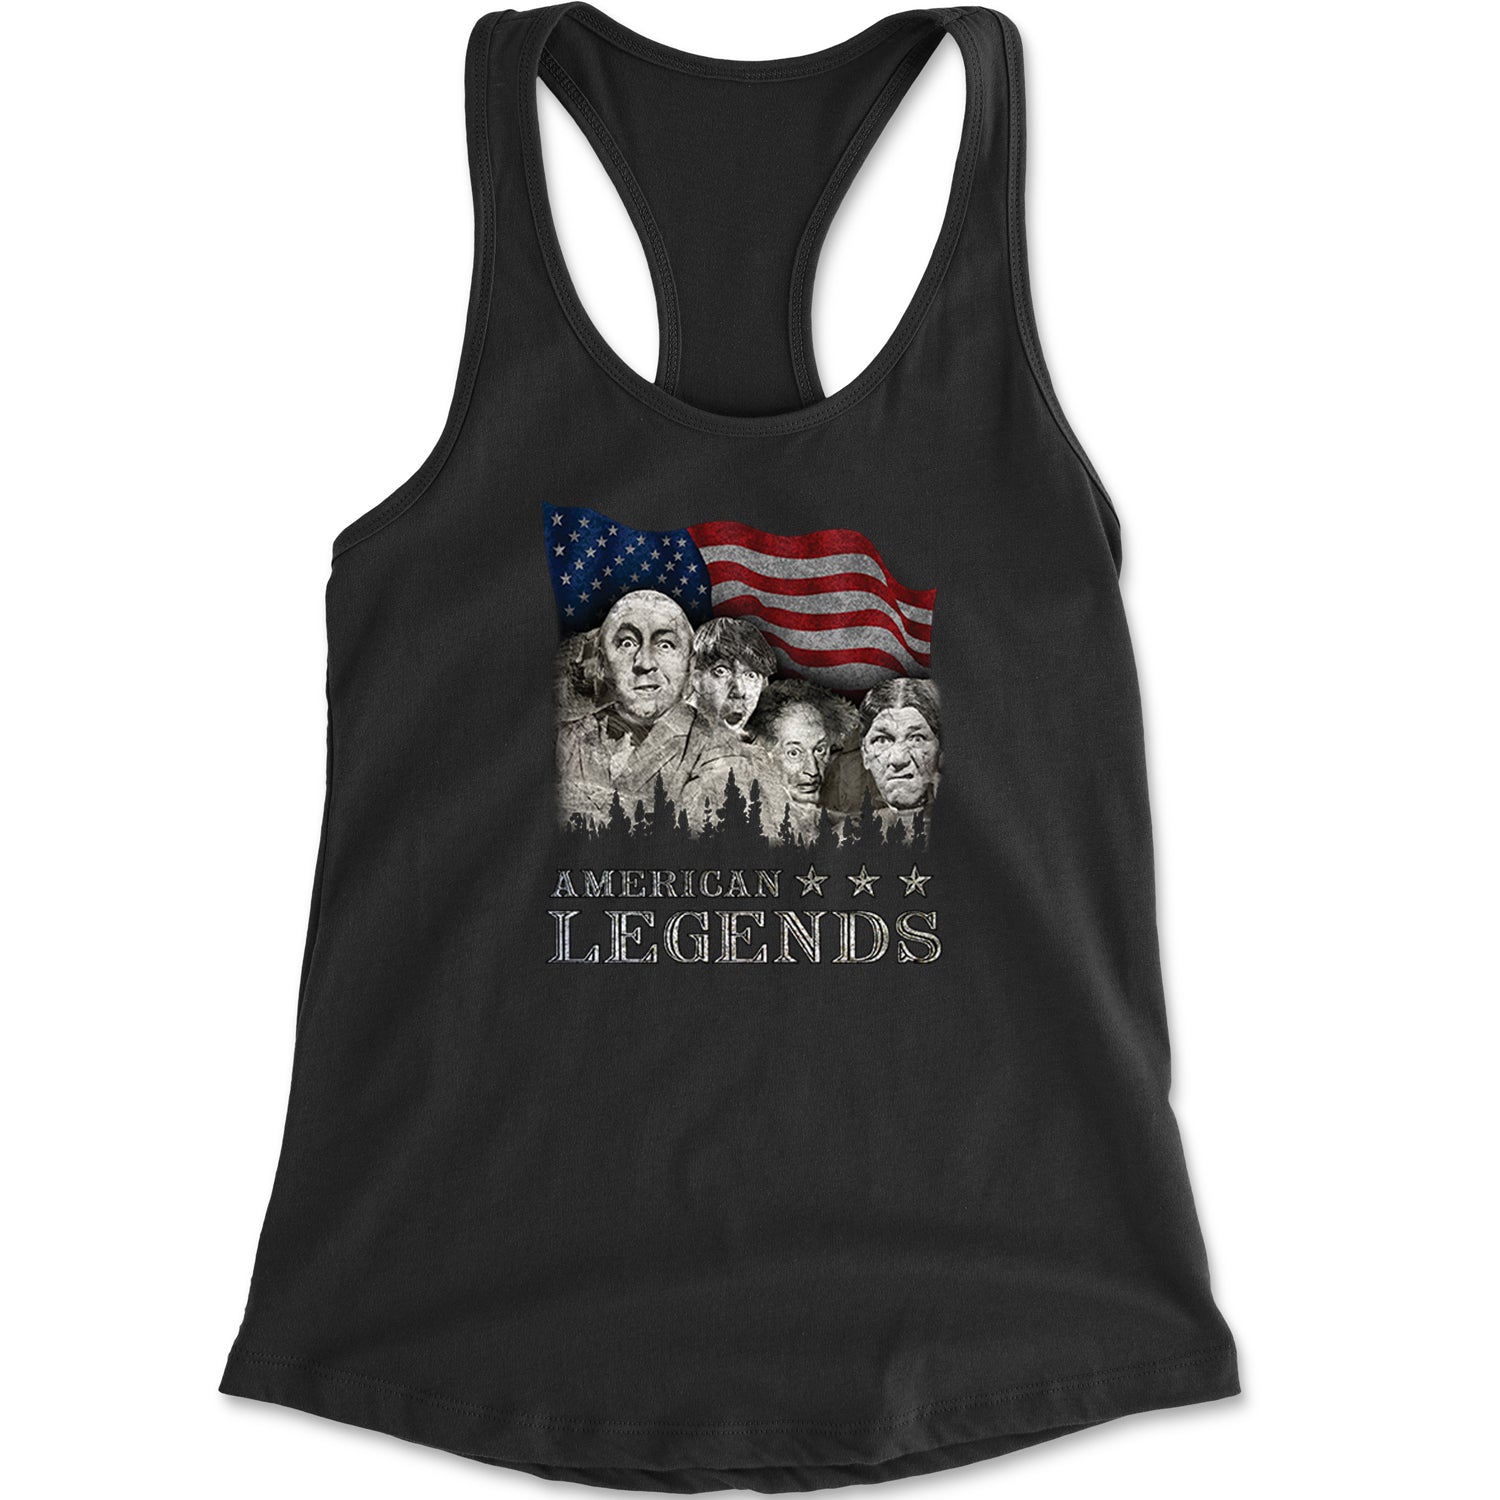 Mount RushMorons 3 Stooges Classic Retro TV Comedy Racerback Tank Top for Women